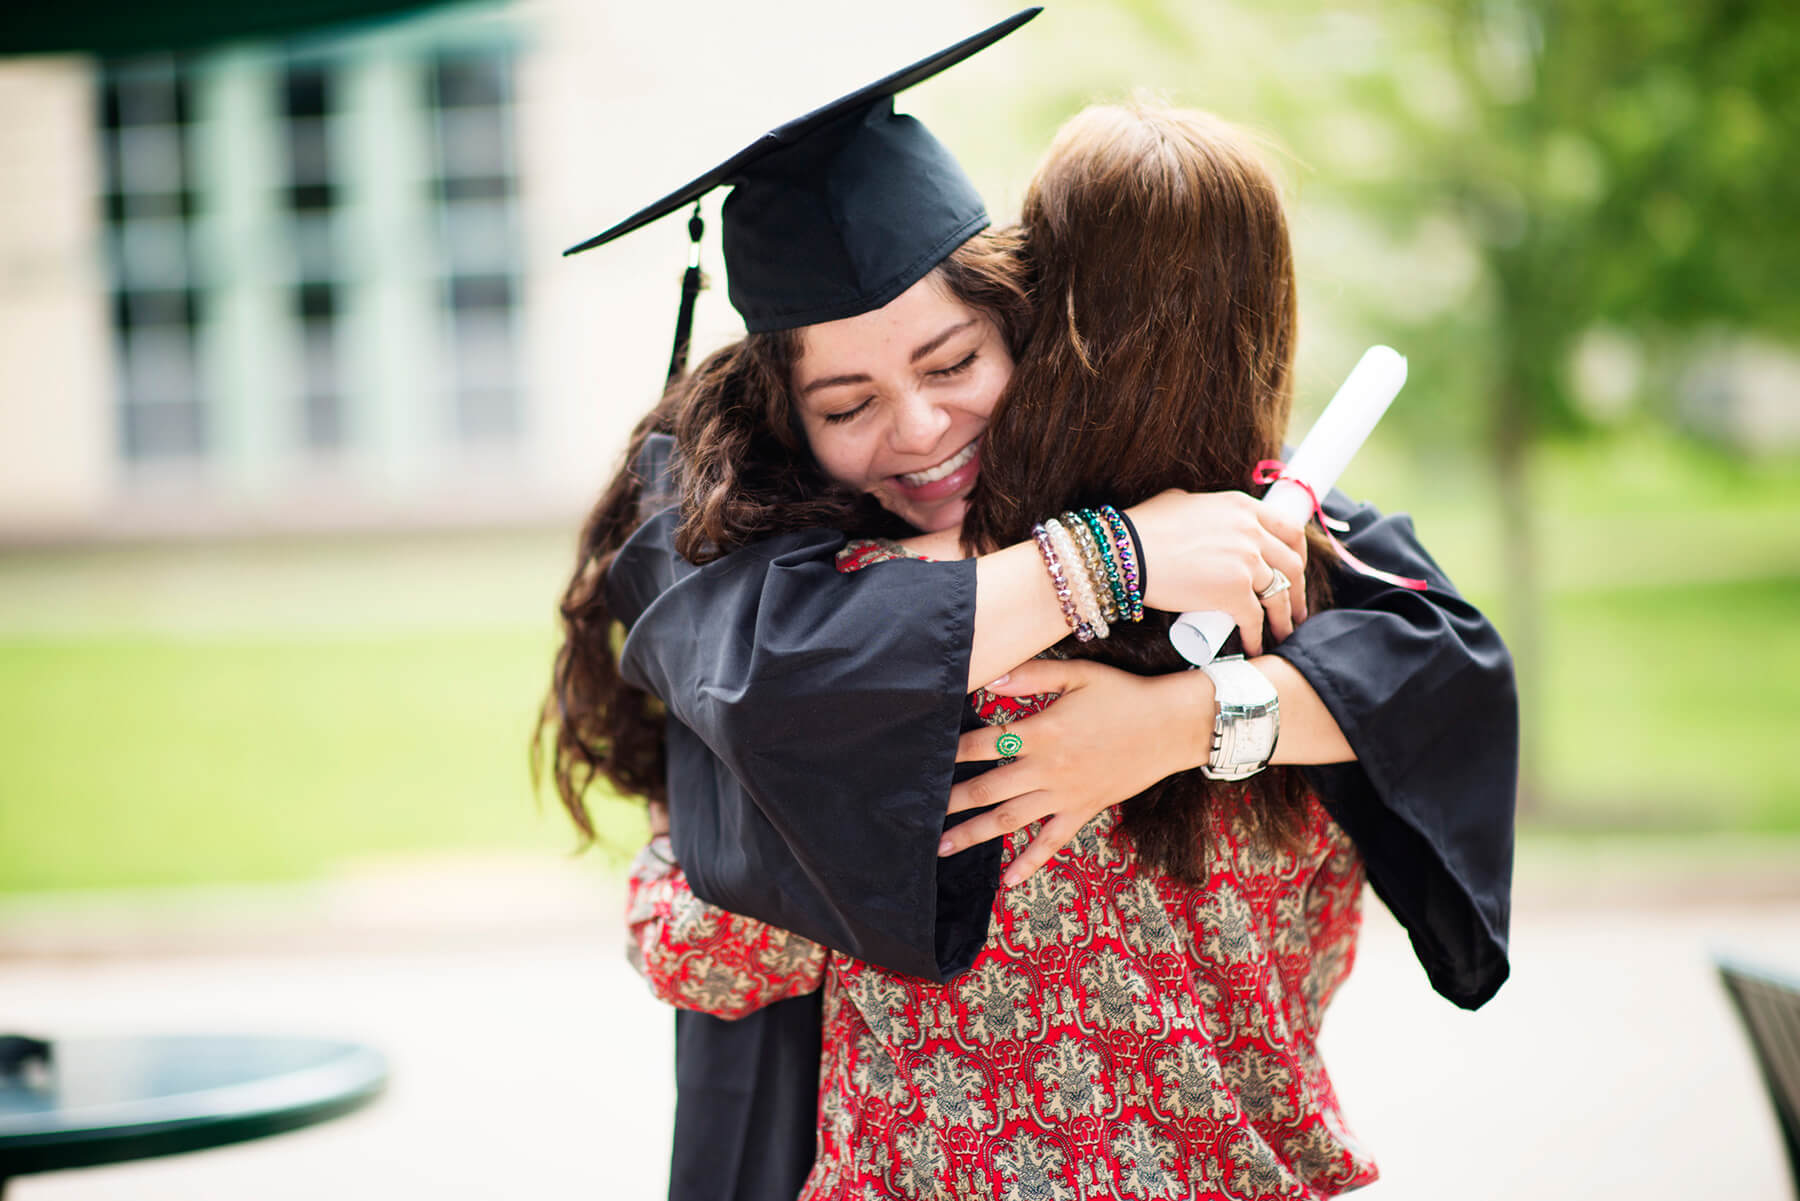 blog 6 topics to discuss before your new grad moves back